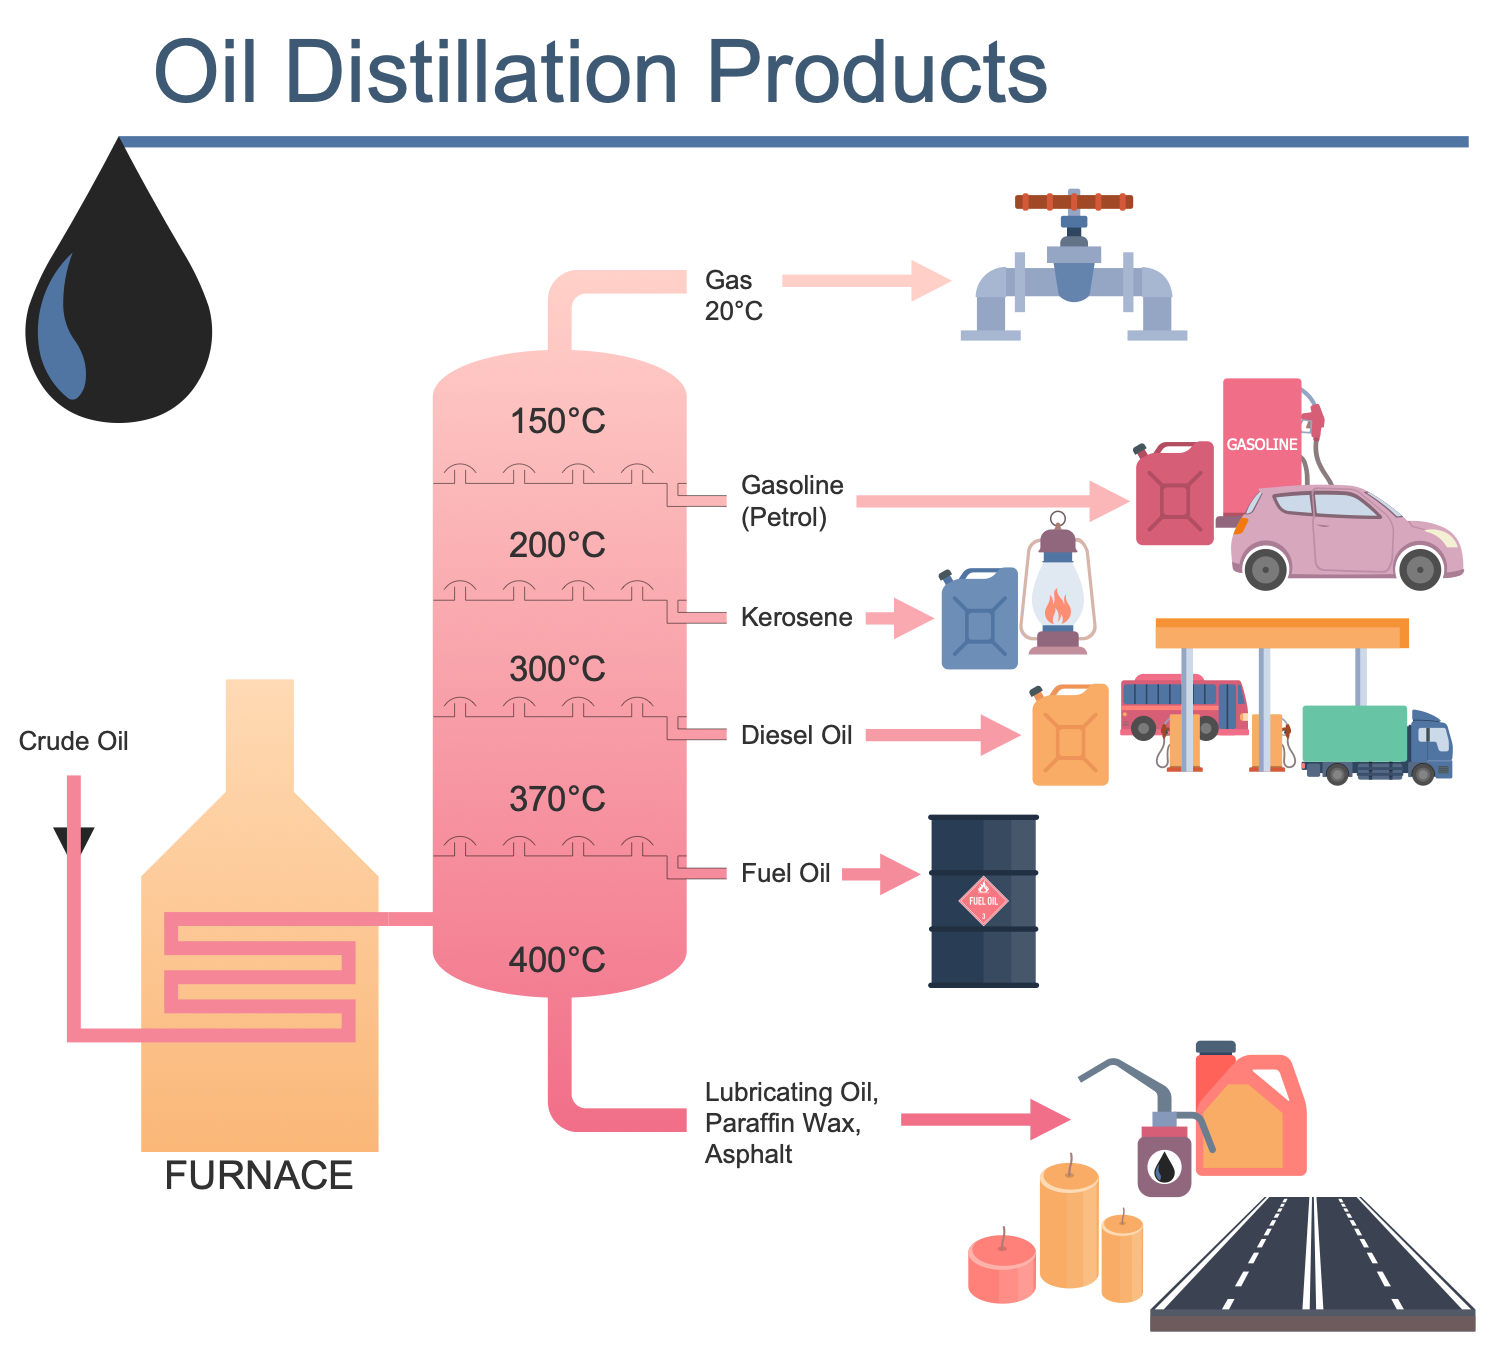 Oil Distillation Products